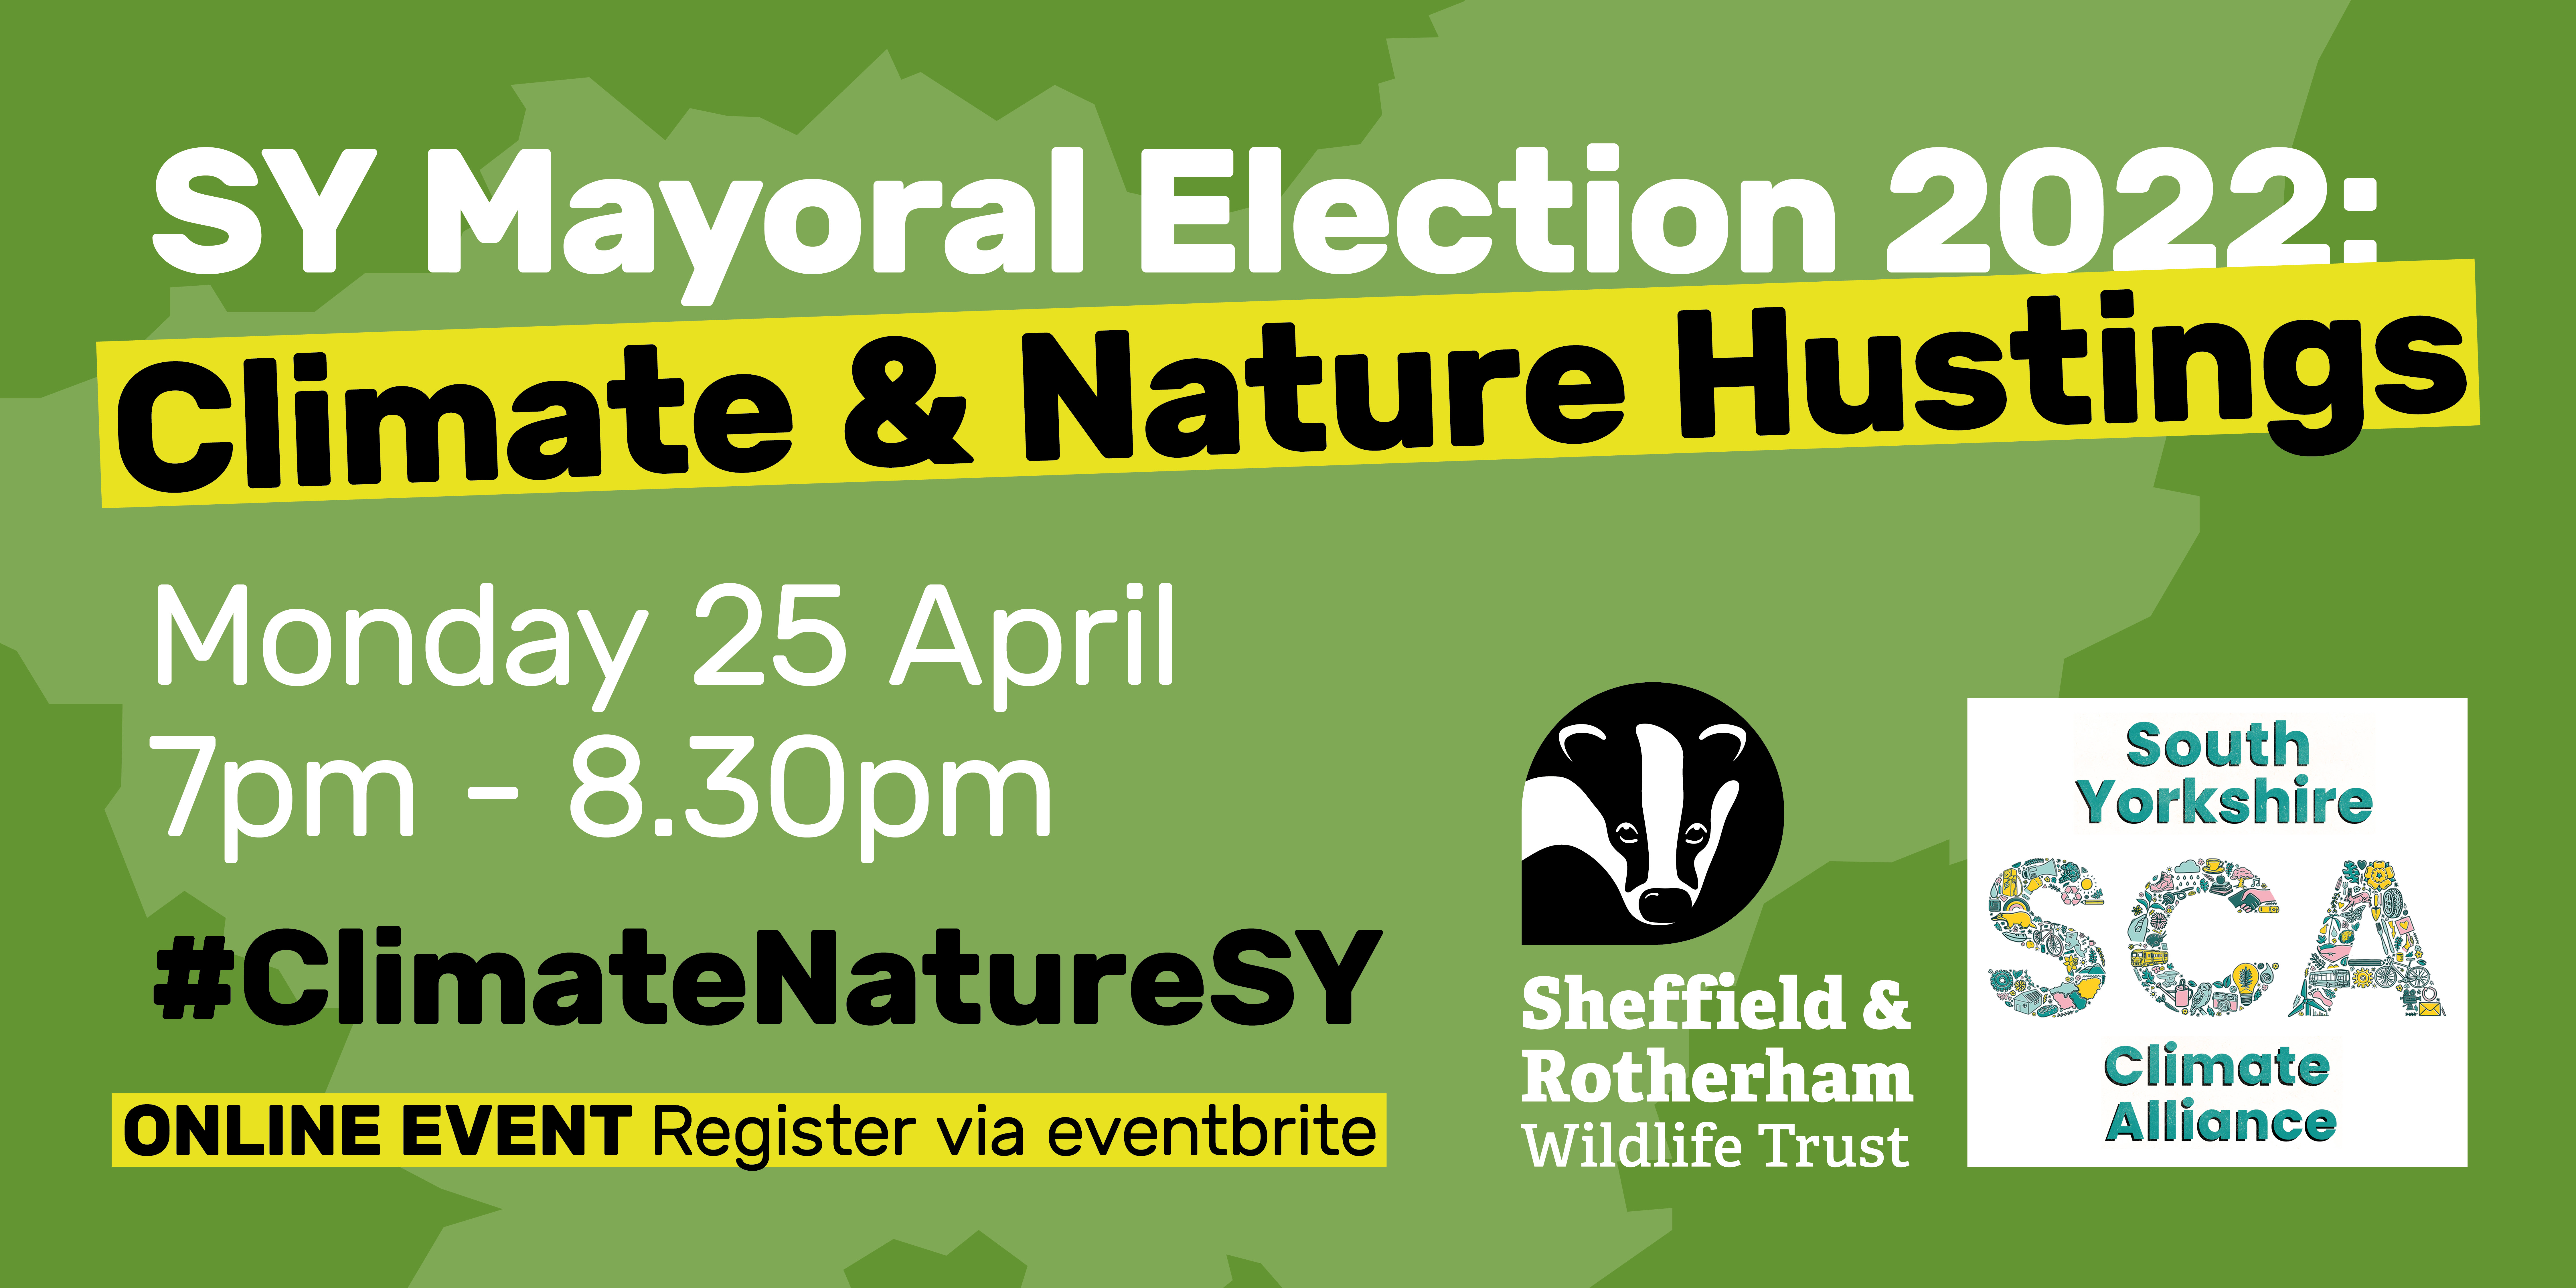 SY Mayoral Election 2022 Climate and Nature Hustings image